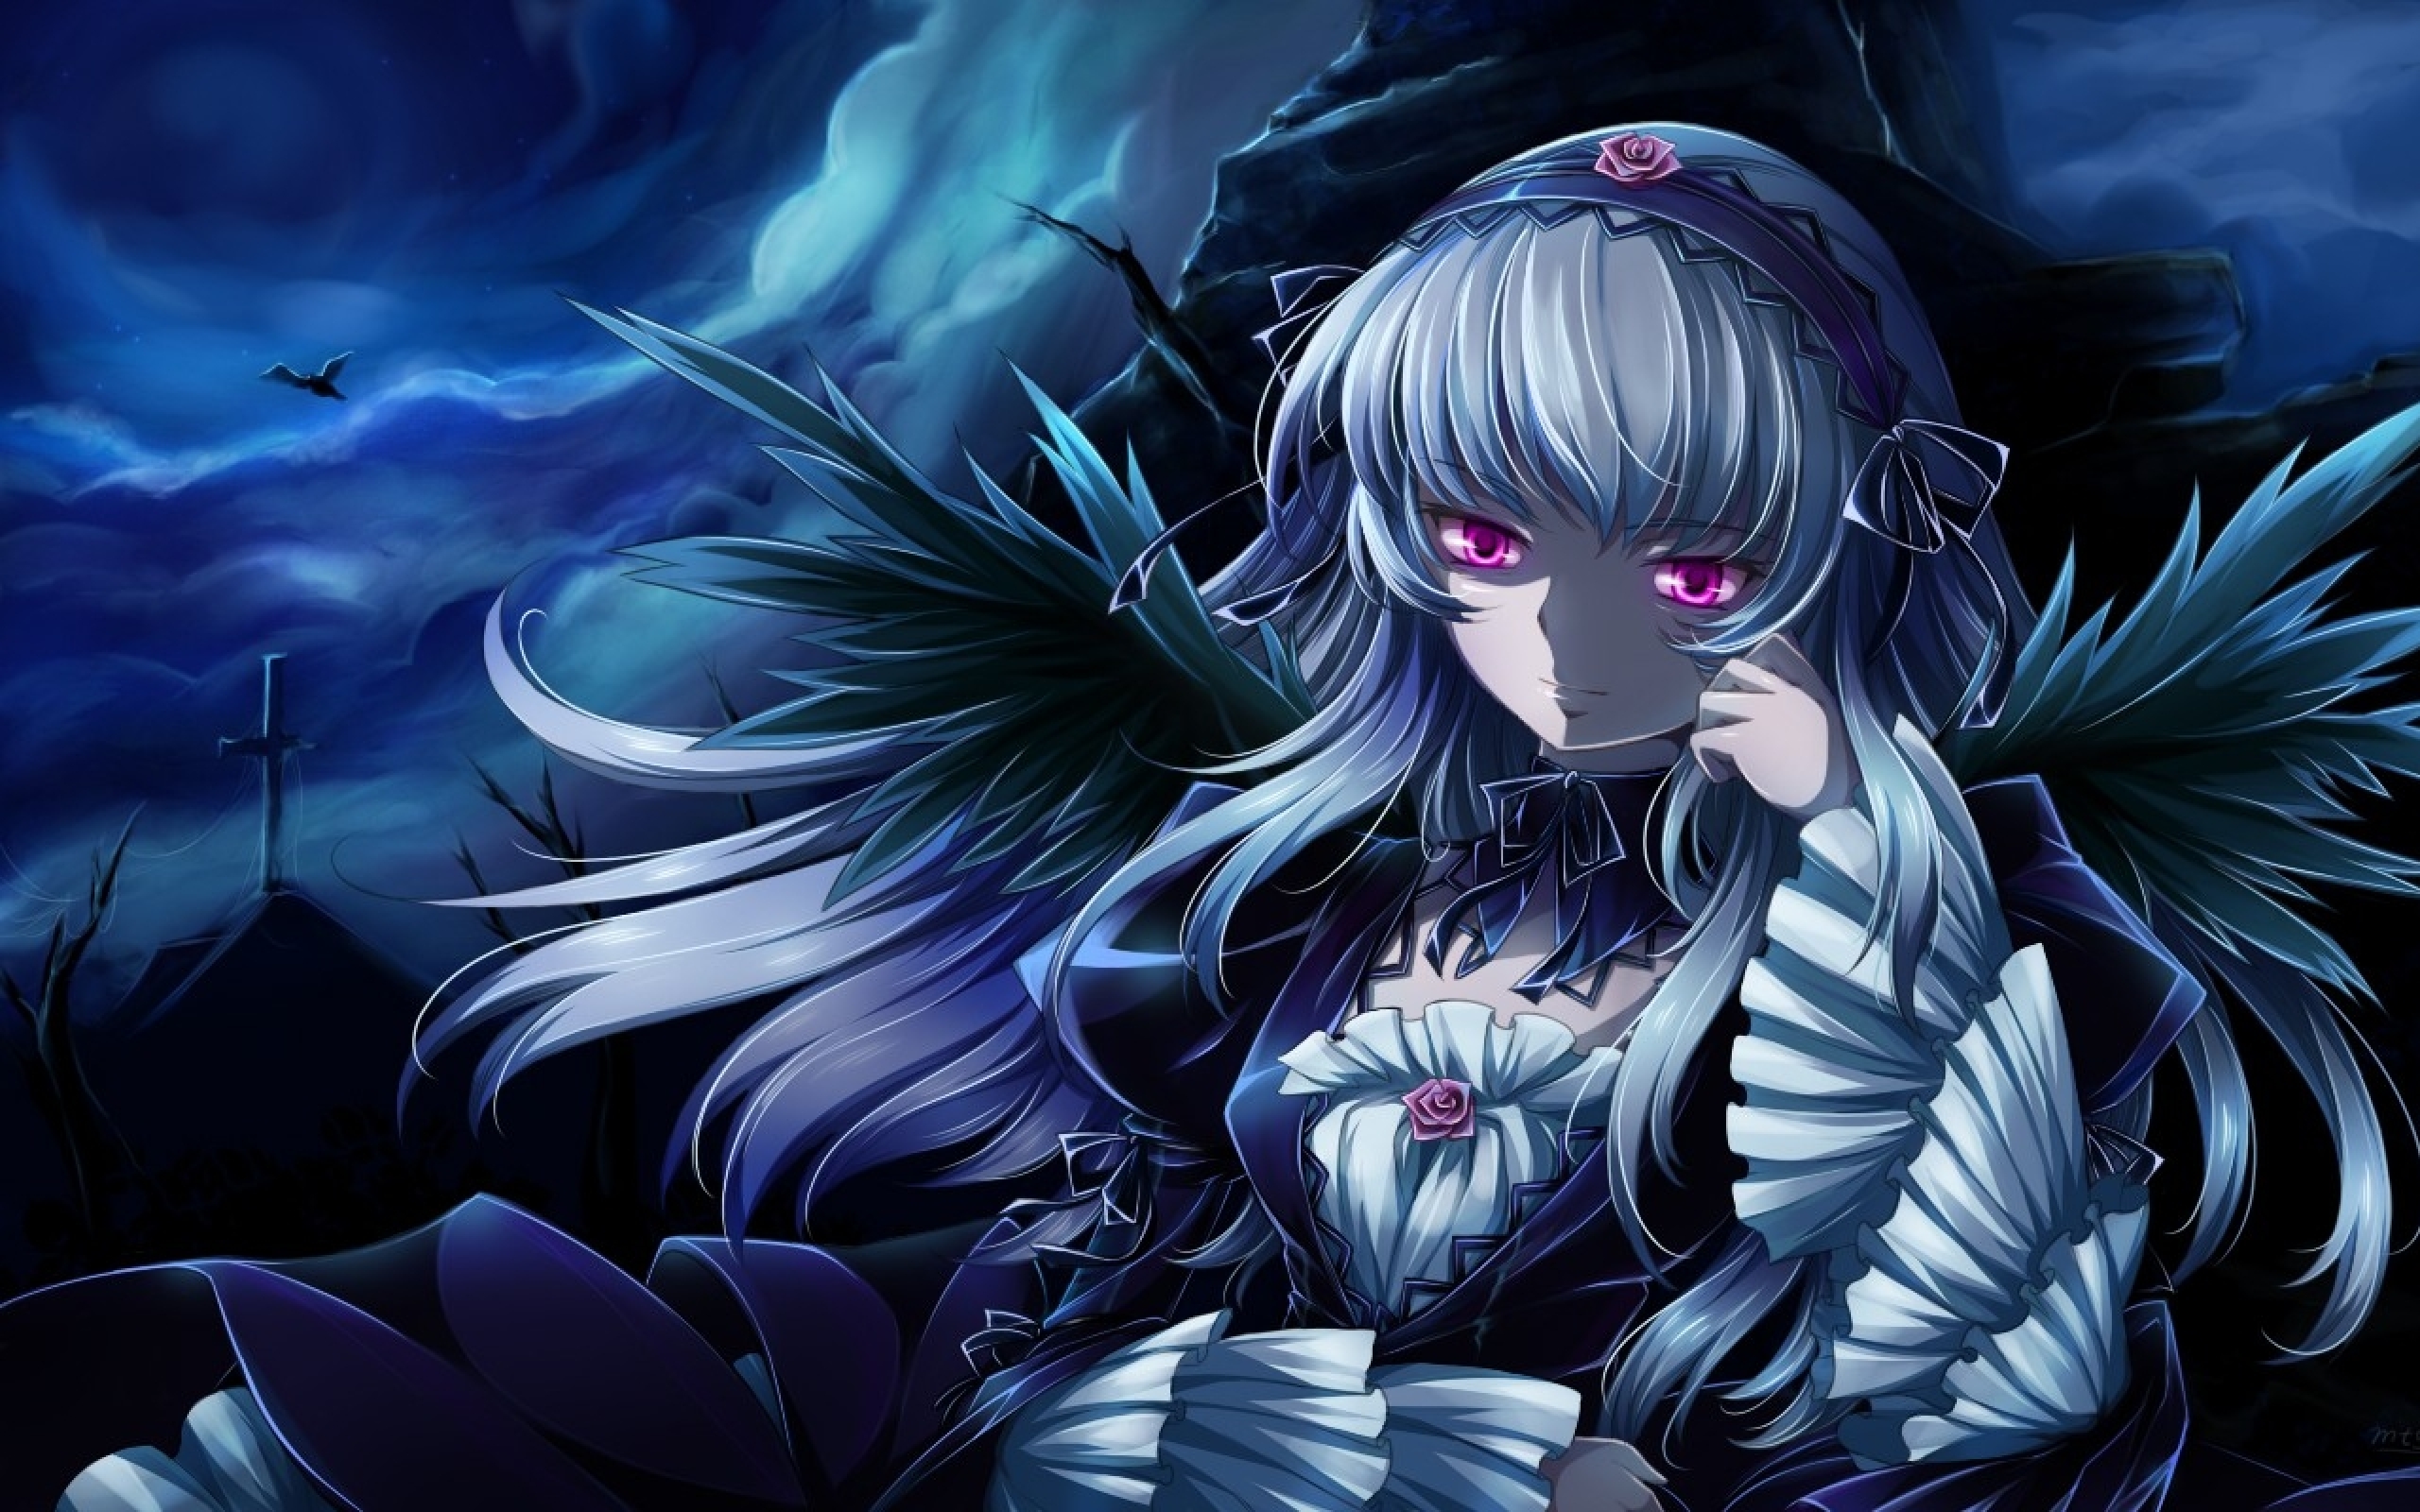 Free Download Hd Gothic Anime Wallpapers 2560x1600 For Your